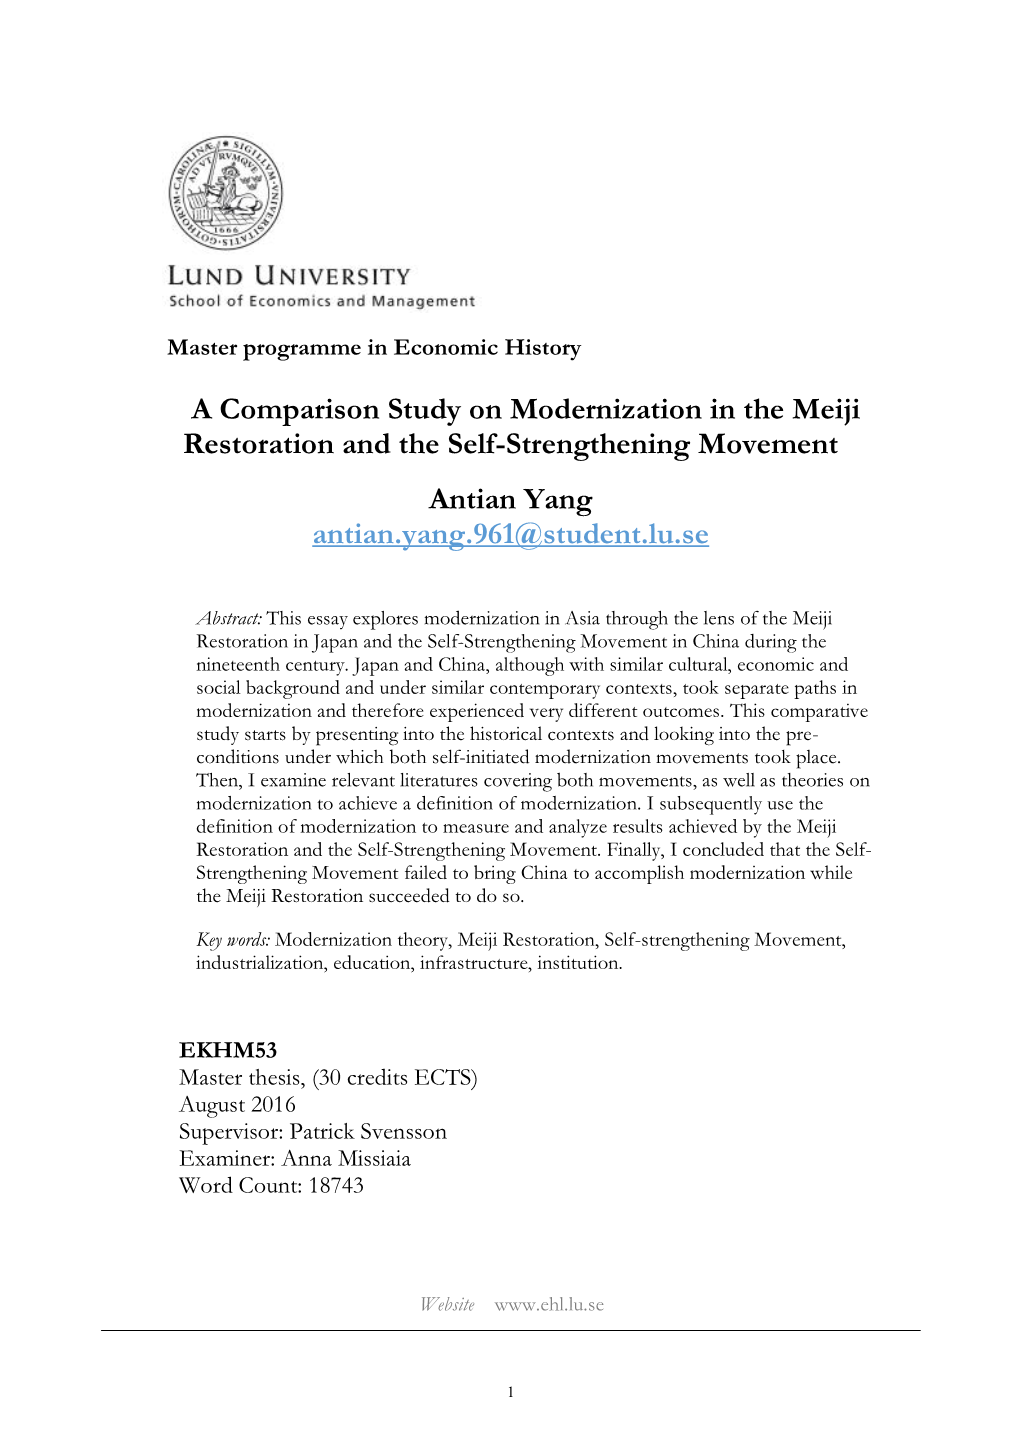 A Comparison Study on Modernization in the Meiji Restoration and the Self-Strengthening Movement Antian Yang Antian.Yang.961@Student.Lu.Se